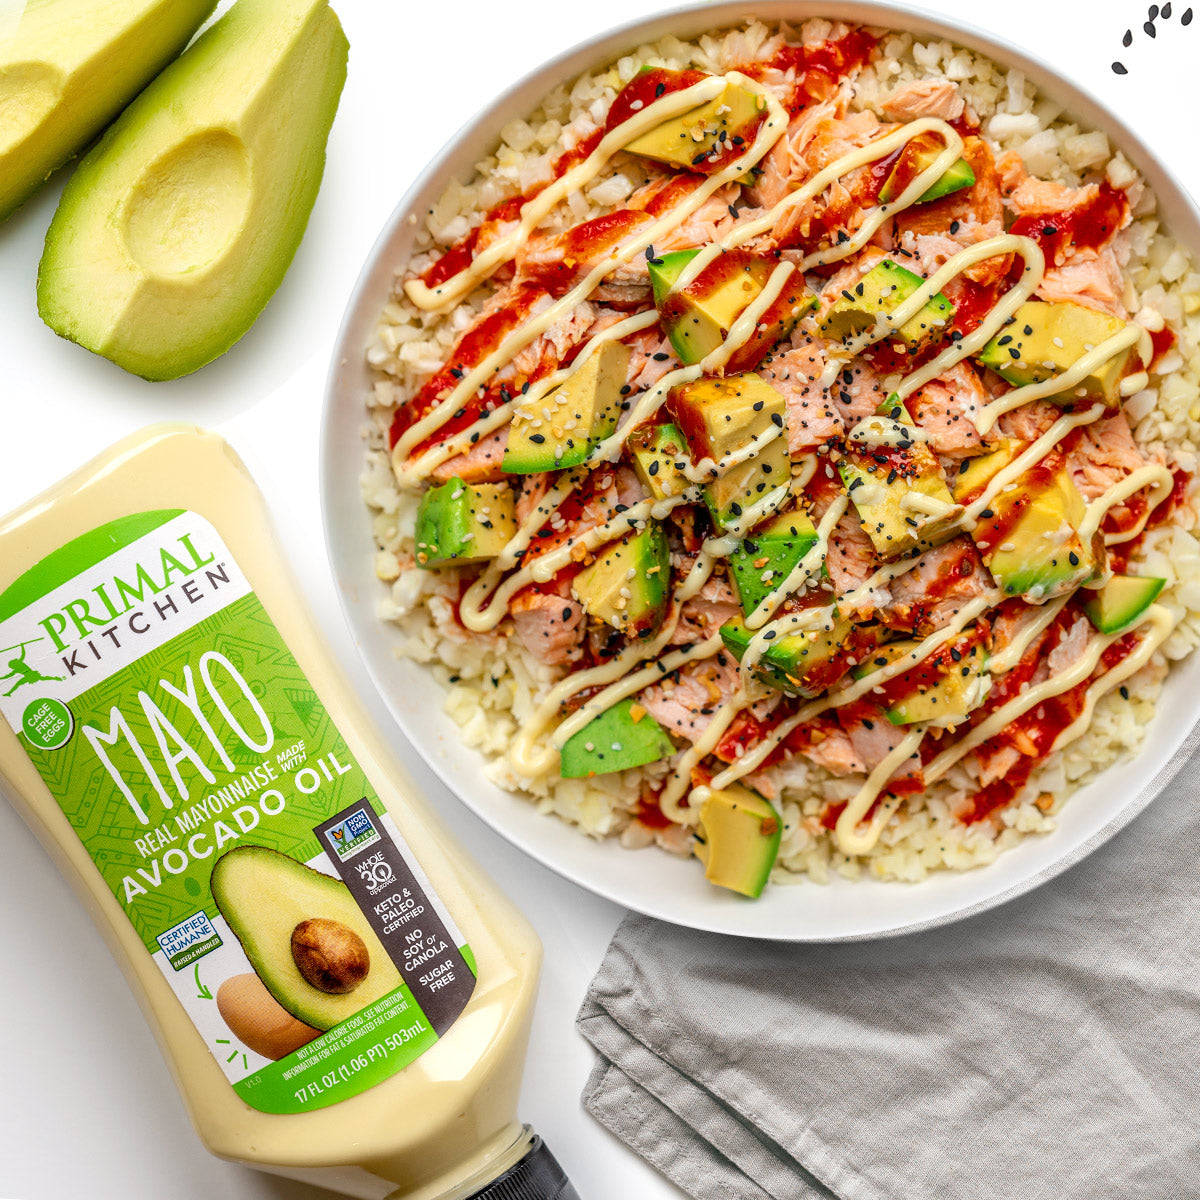 Avocado salmon rice bowl drizzled with mayo in a white bowl on top of a gray napkin next to cut avocado and a squeeze bottle of Primal Kitchen Mayo.